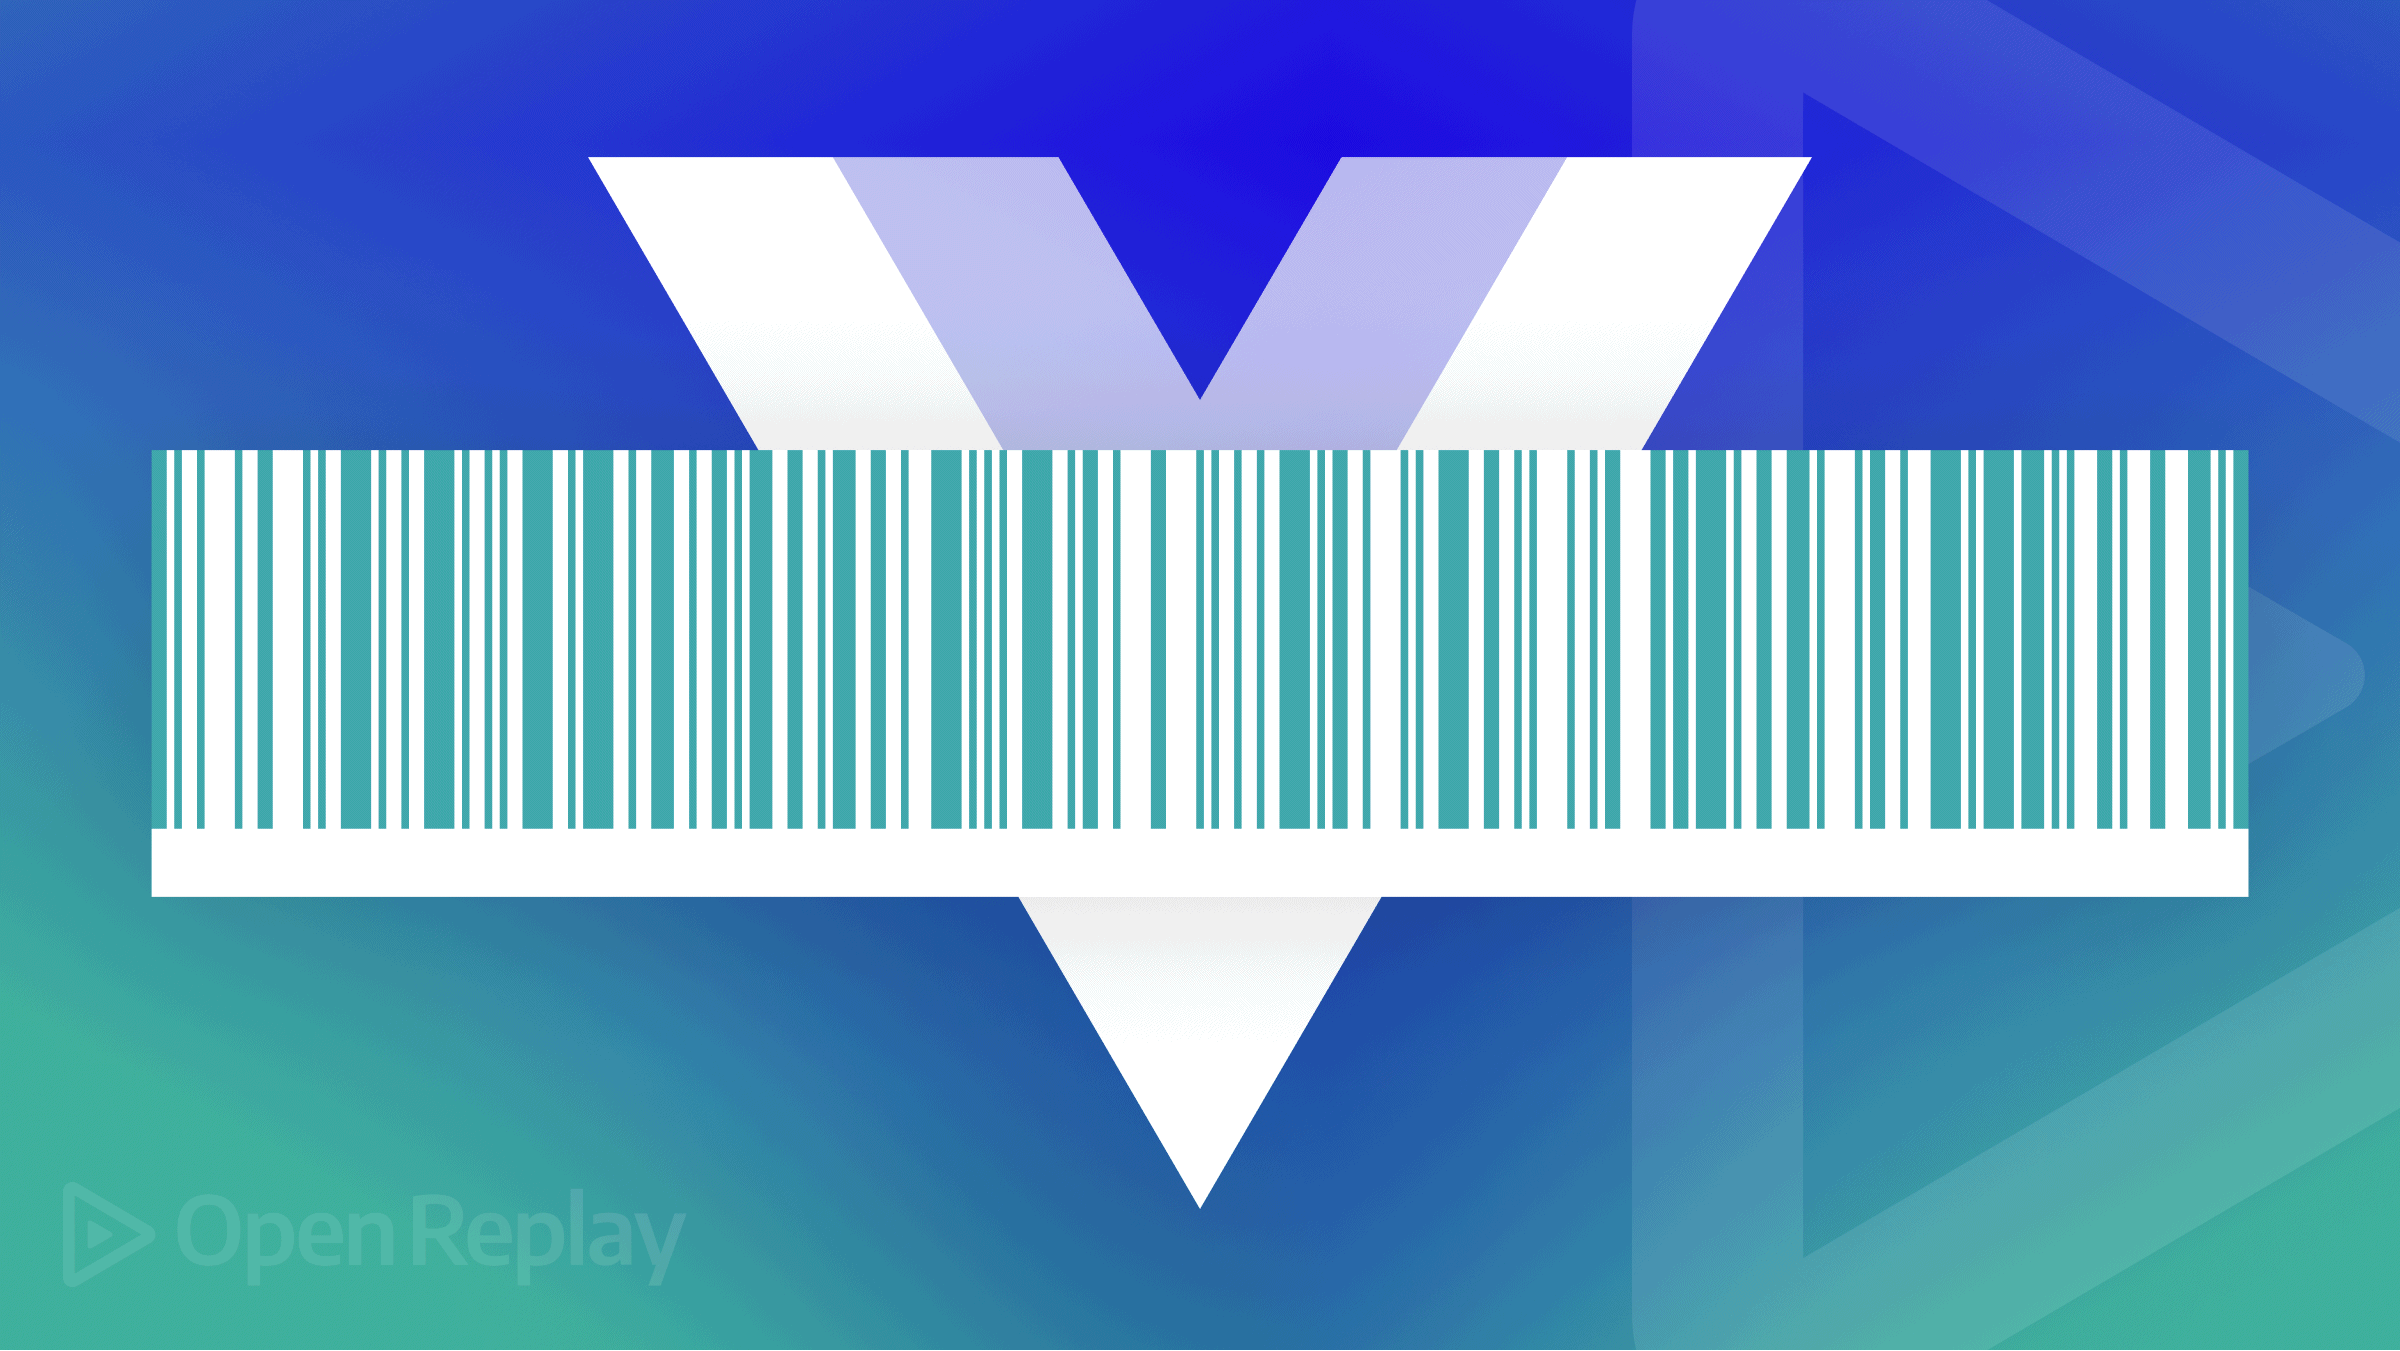 Generating barcodes with Vue